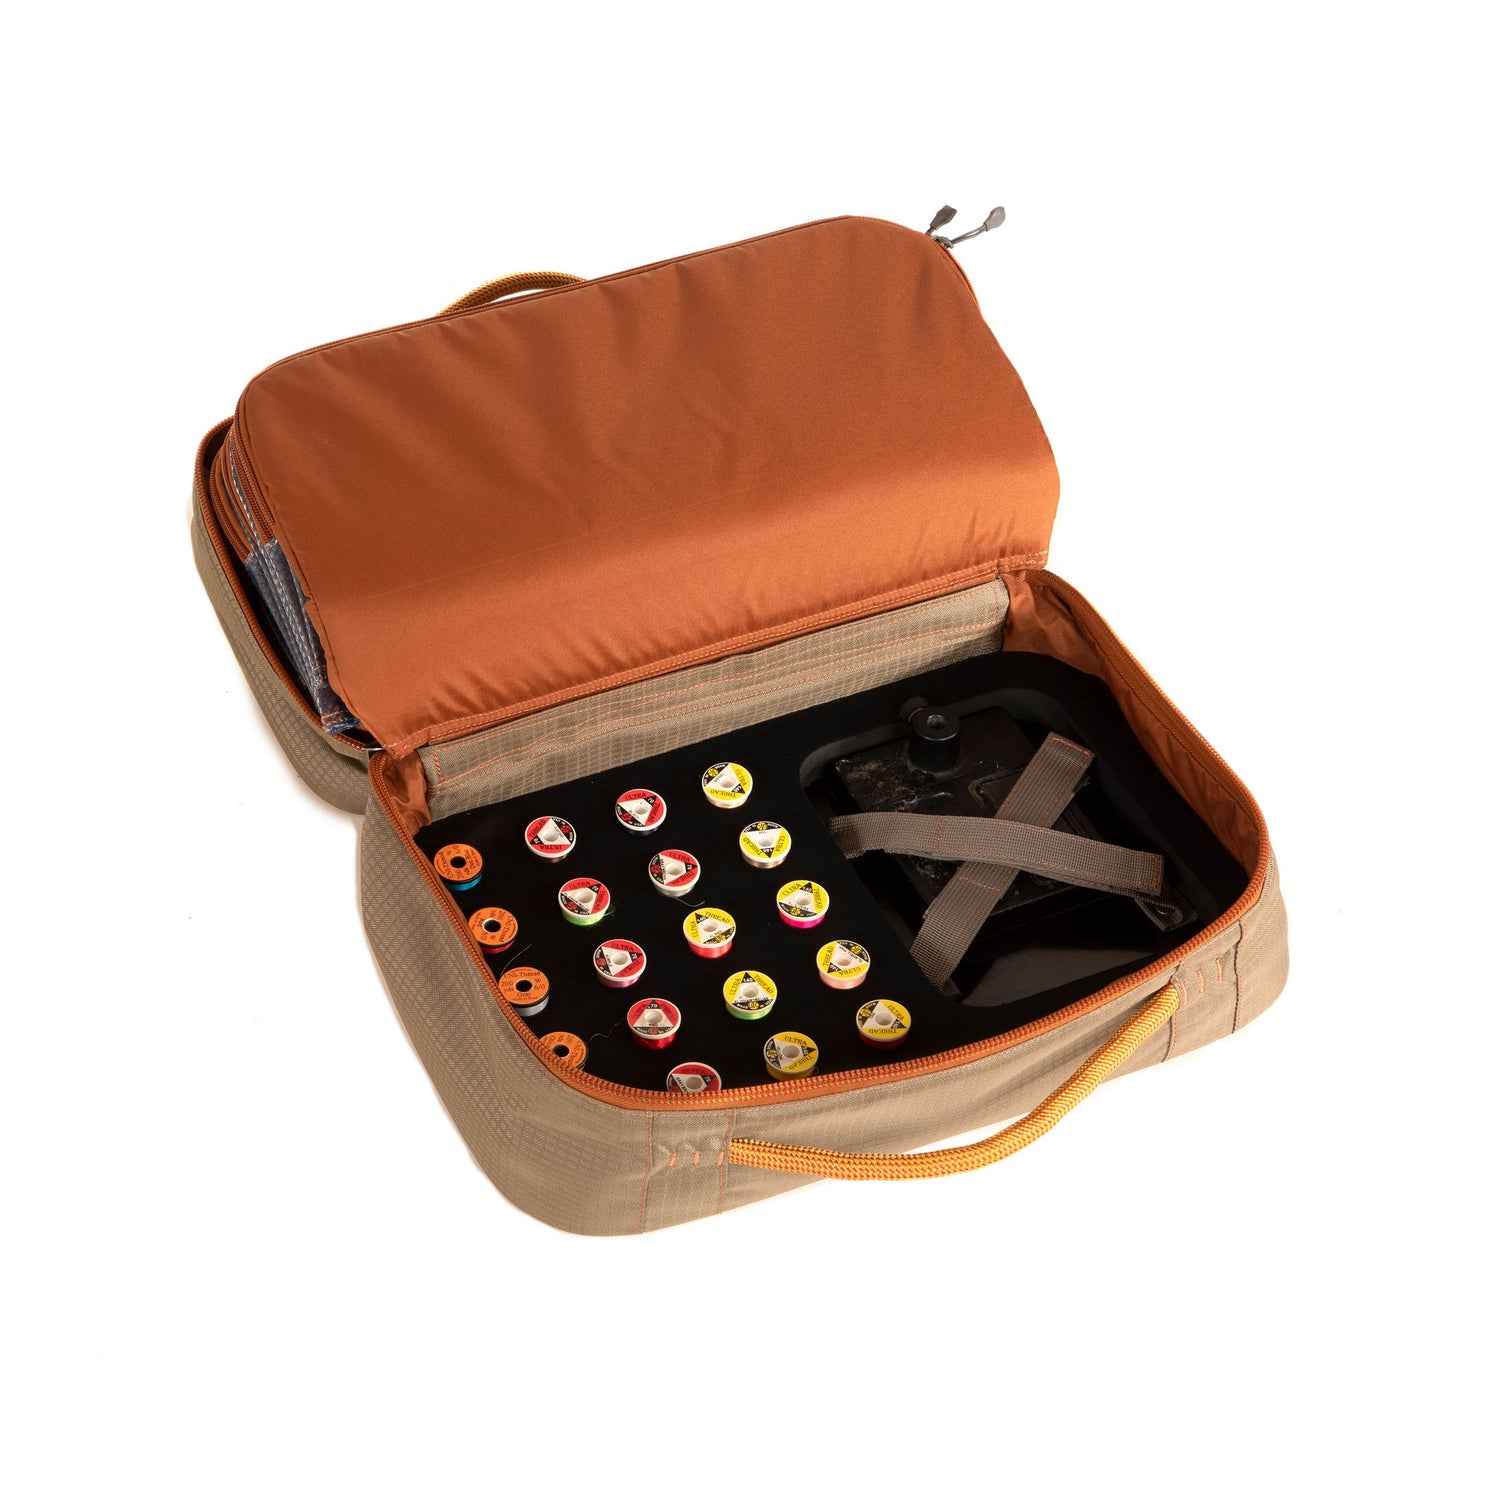 High quality wooden fly tying tool kit,in a carry bag,built-in